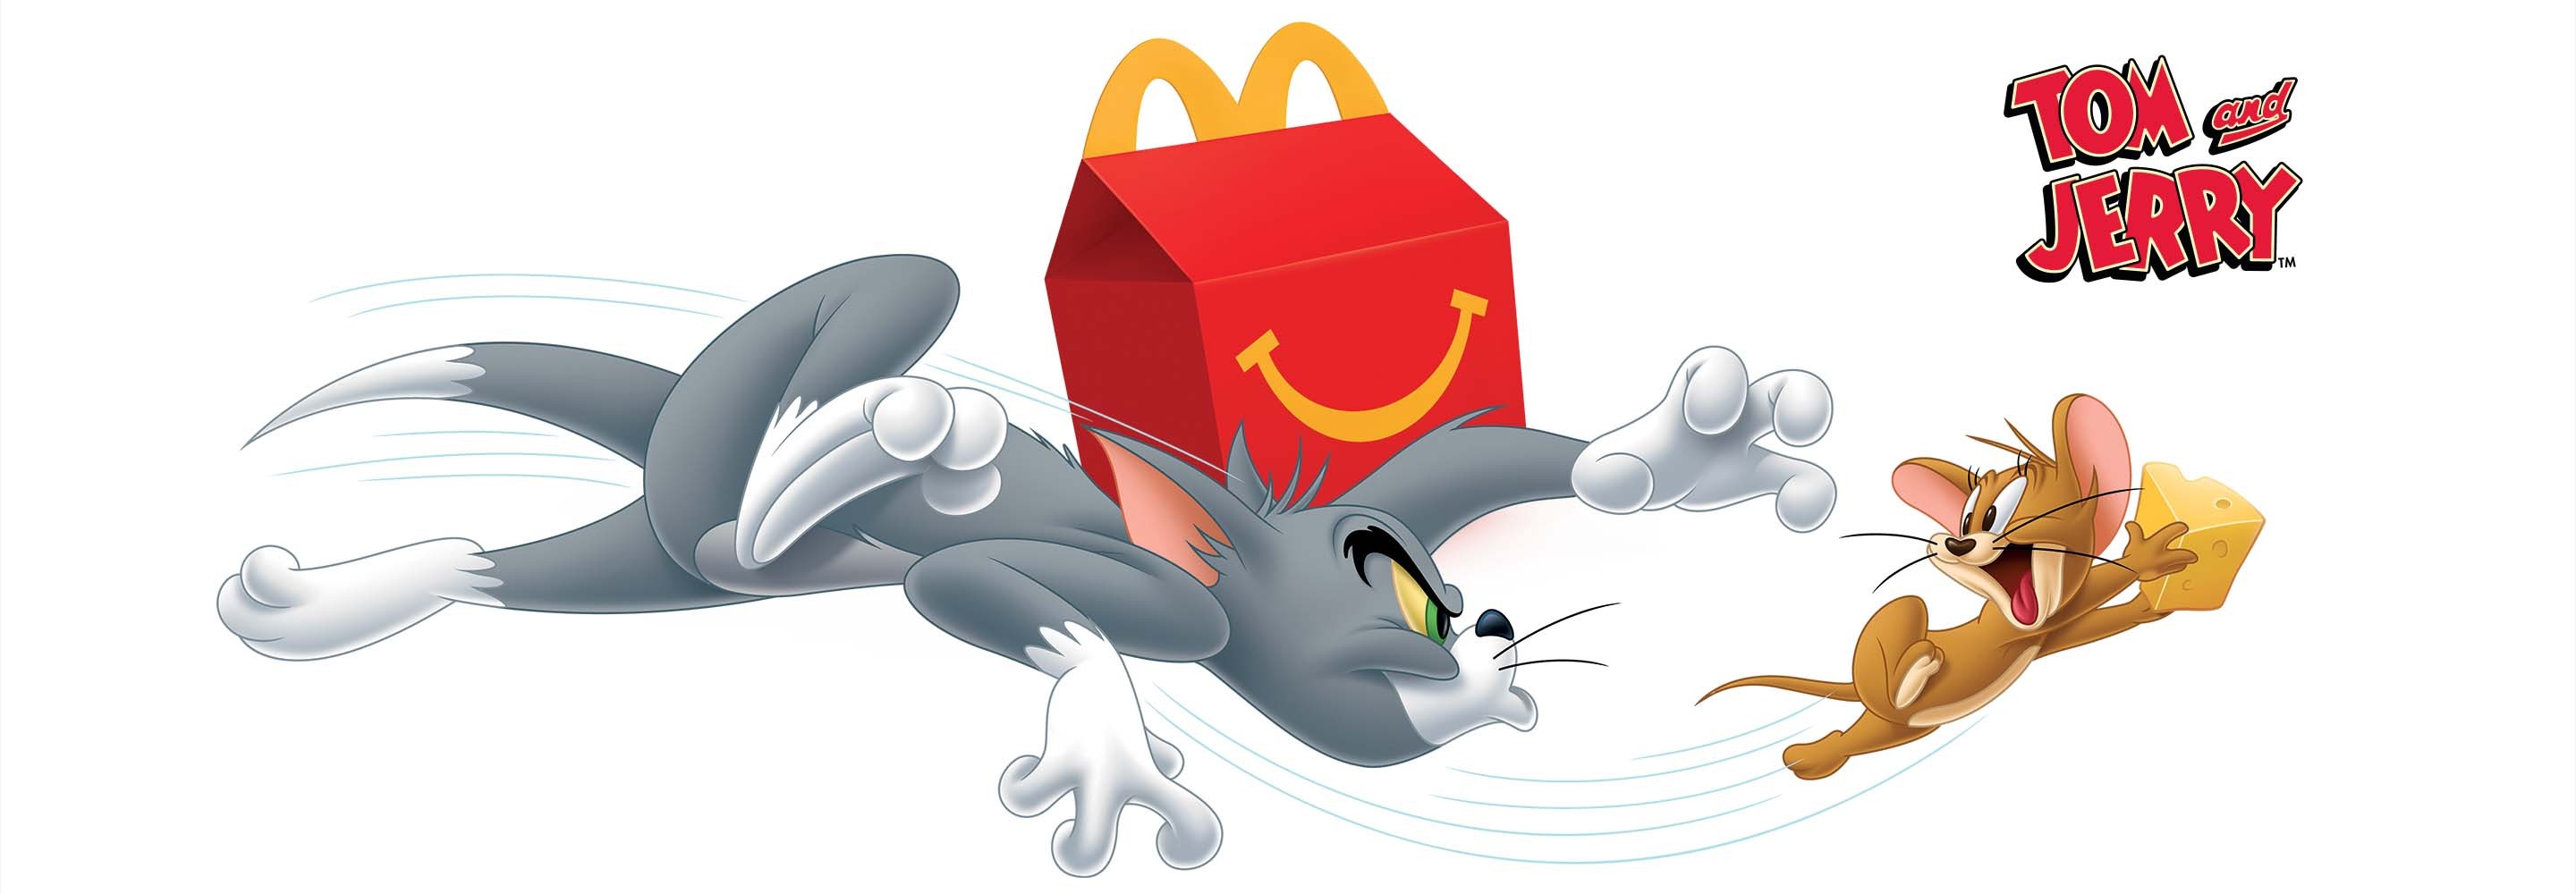 Happy Meal - Tom & Jerry